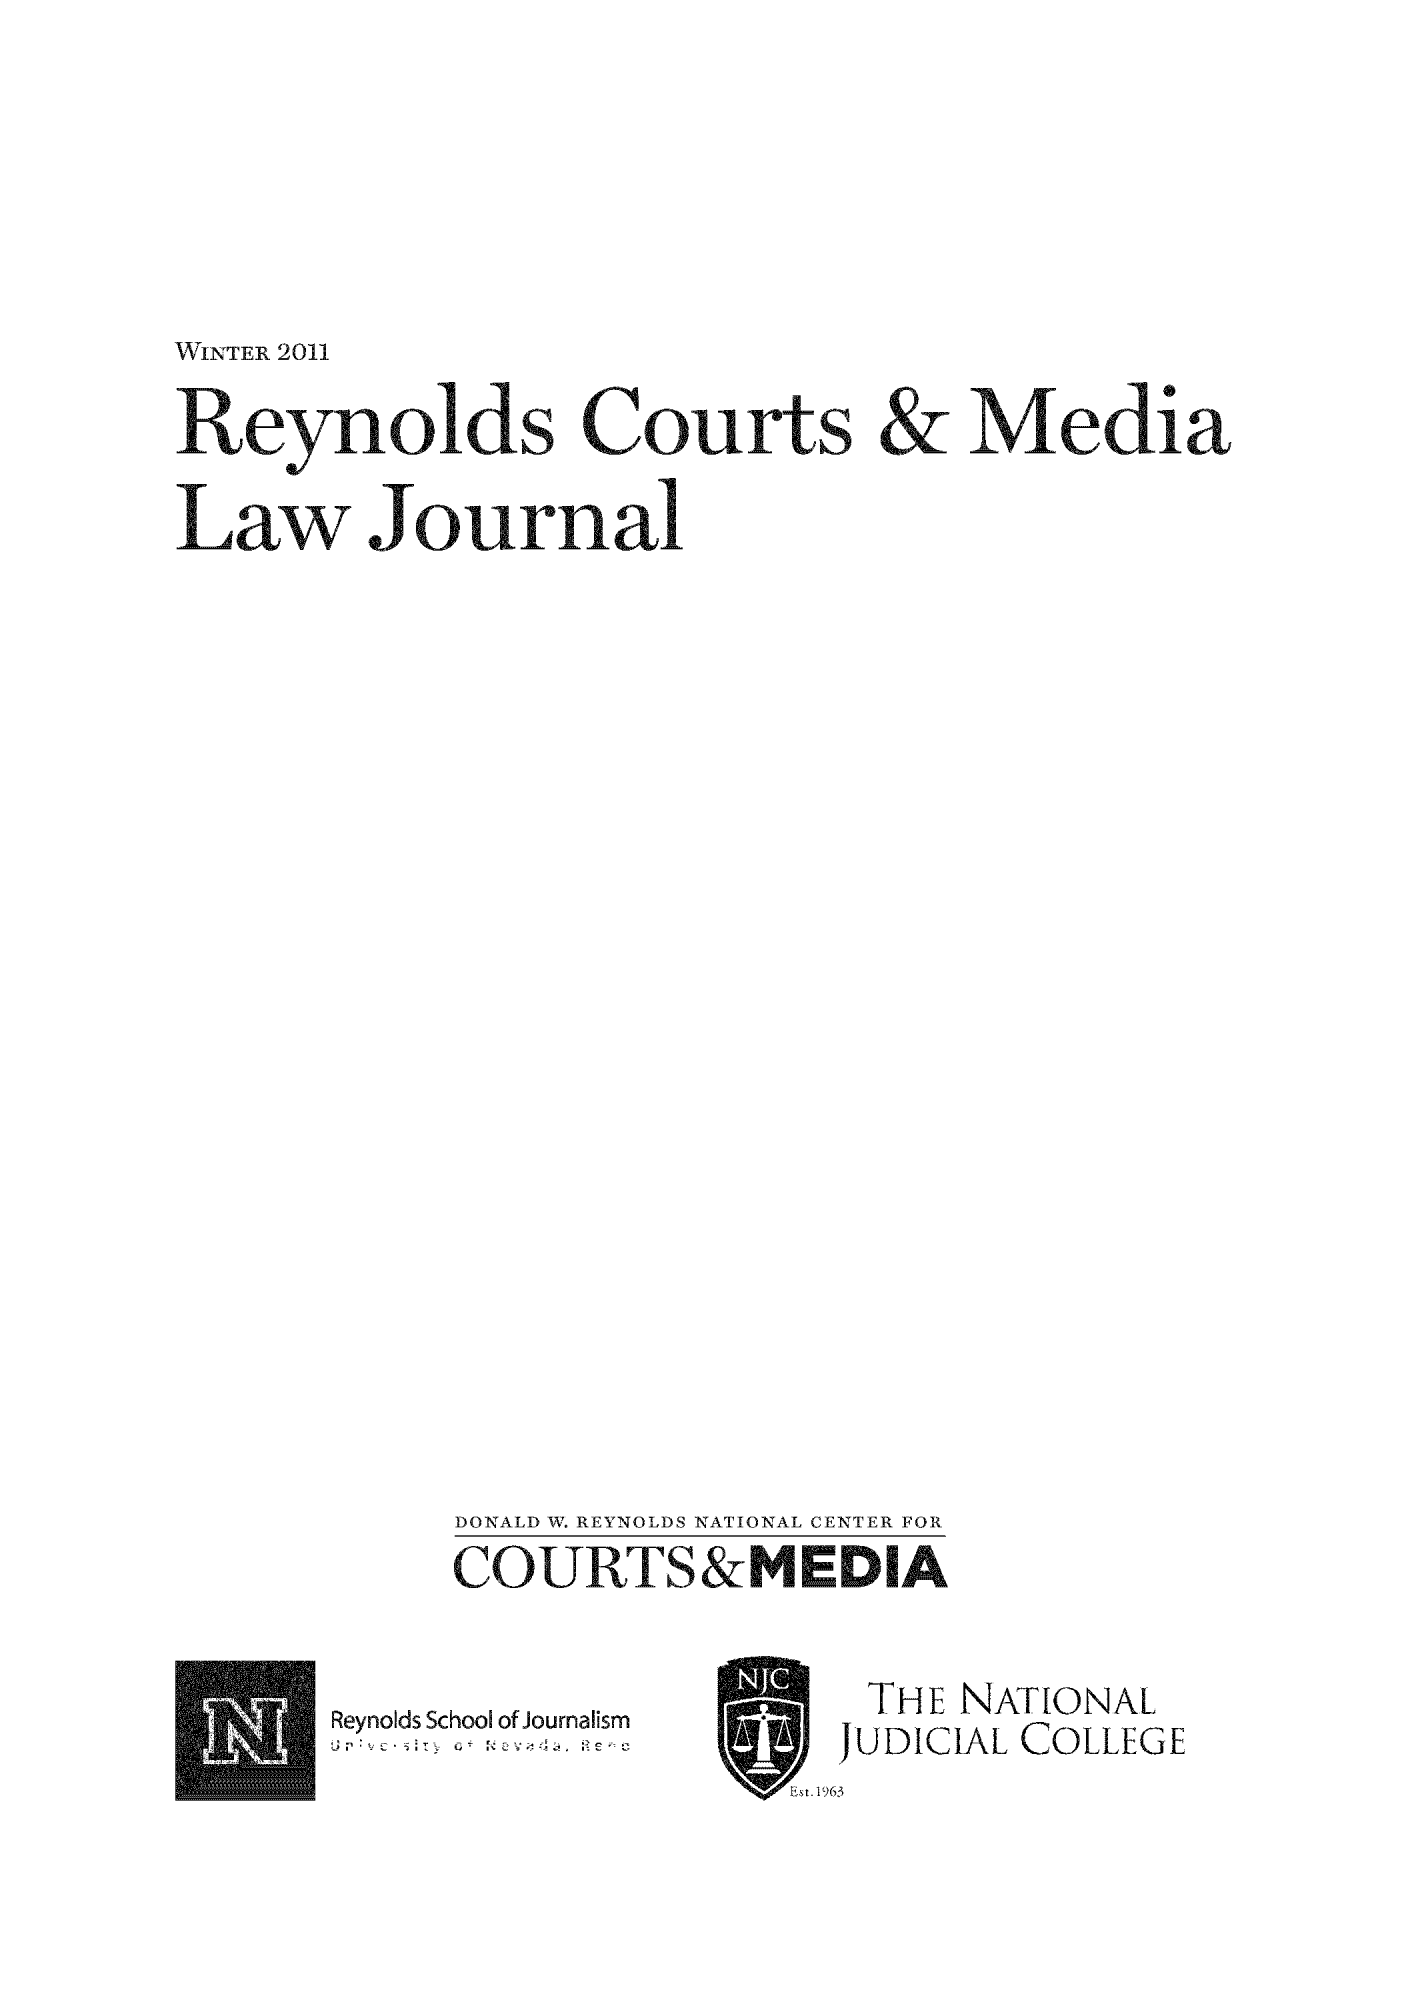 handle is hein.journals/reycome1 and id is 1 raw text is: WVINTER 2011
Reynolds Courts & Media
Law Journal
DONALD W. REYNOLDS NATIONAL CENTER FOR
COURTS&MEDIA

Reynolds School of Journalism

THE NATIONAL
JUDICIAL COLLEGE
Est.1963


